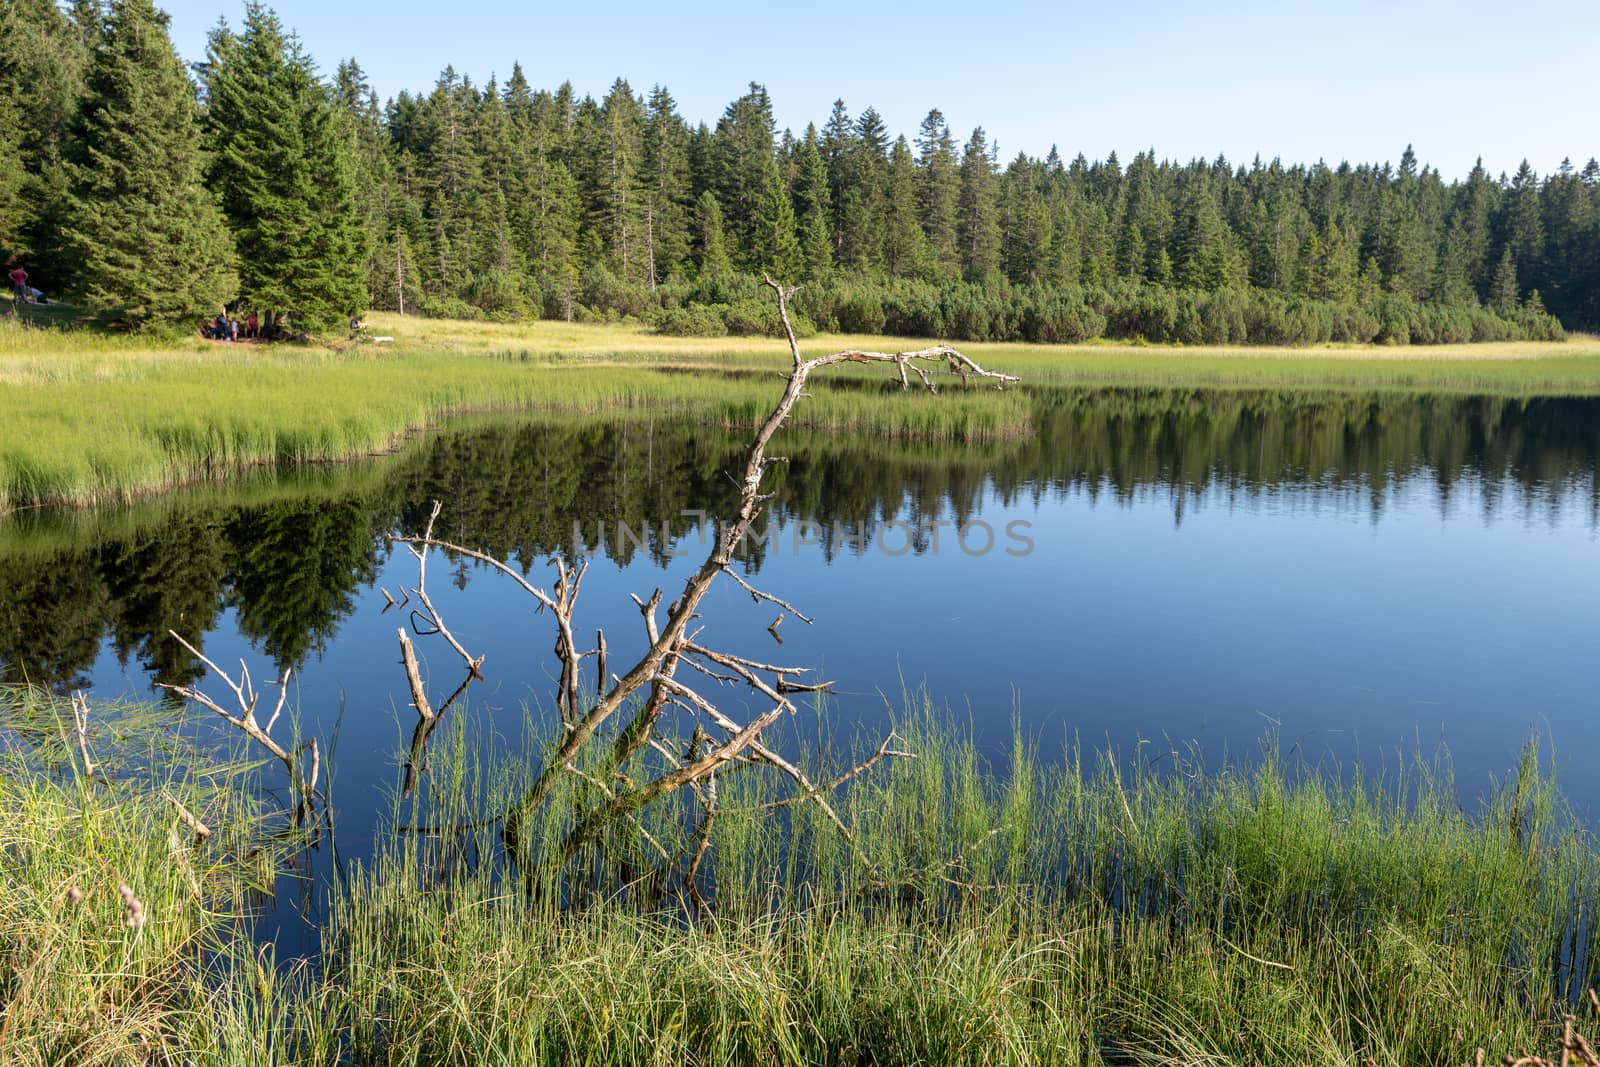 Lake on top of mountain, dark colored water and vibrant green grass, surrounded with trees, dry branck sticking out of water, Crno jezero or Black lake is a popular hiking destination on Pohorje